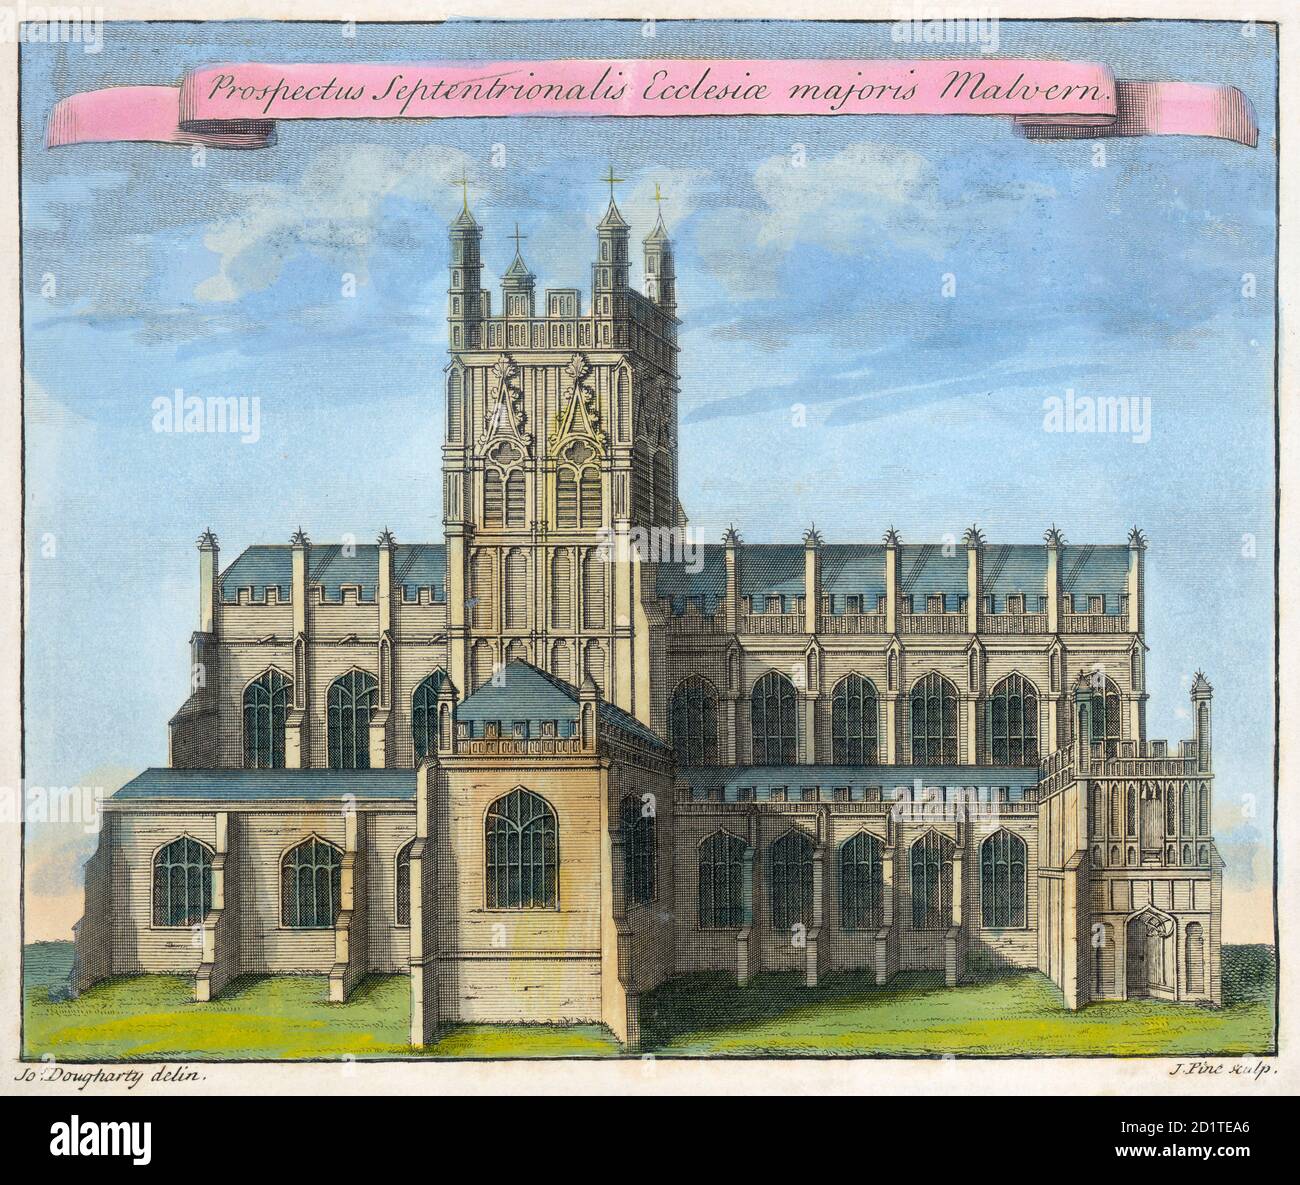 MAYSON BEETON COLLECTION. Great Malvern Priory, Worcestershire. 'Northern view of the church of Great Malvern' by Joseph Dougharty. Line coloured engraving dated 1730. Stock Photo